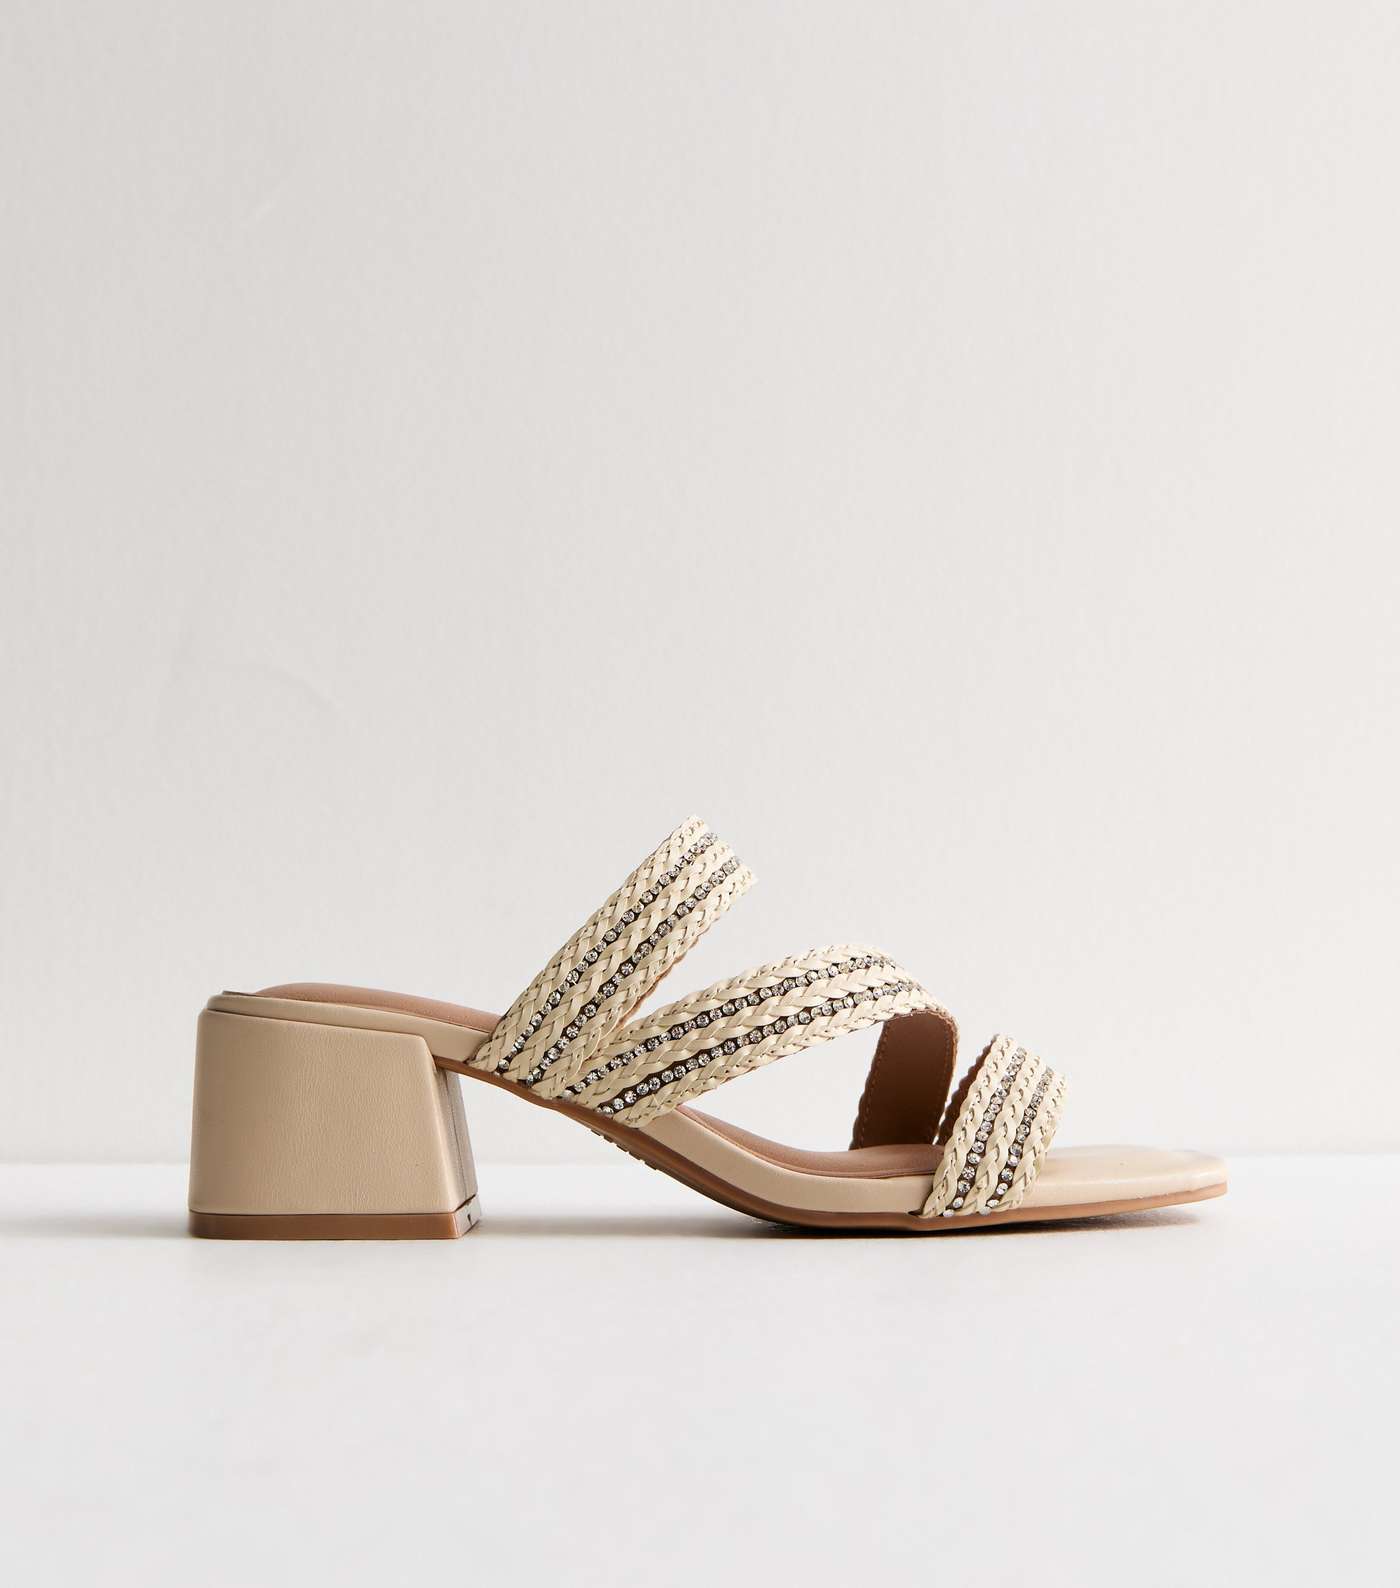 Off White Leather-Look Triple Strap Block Heel Mules Image 5